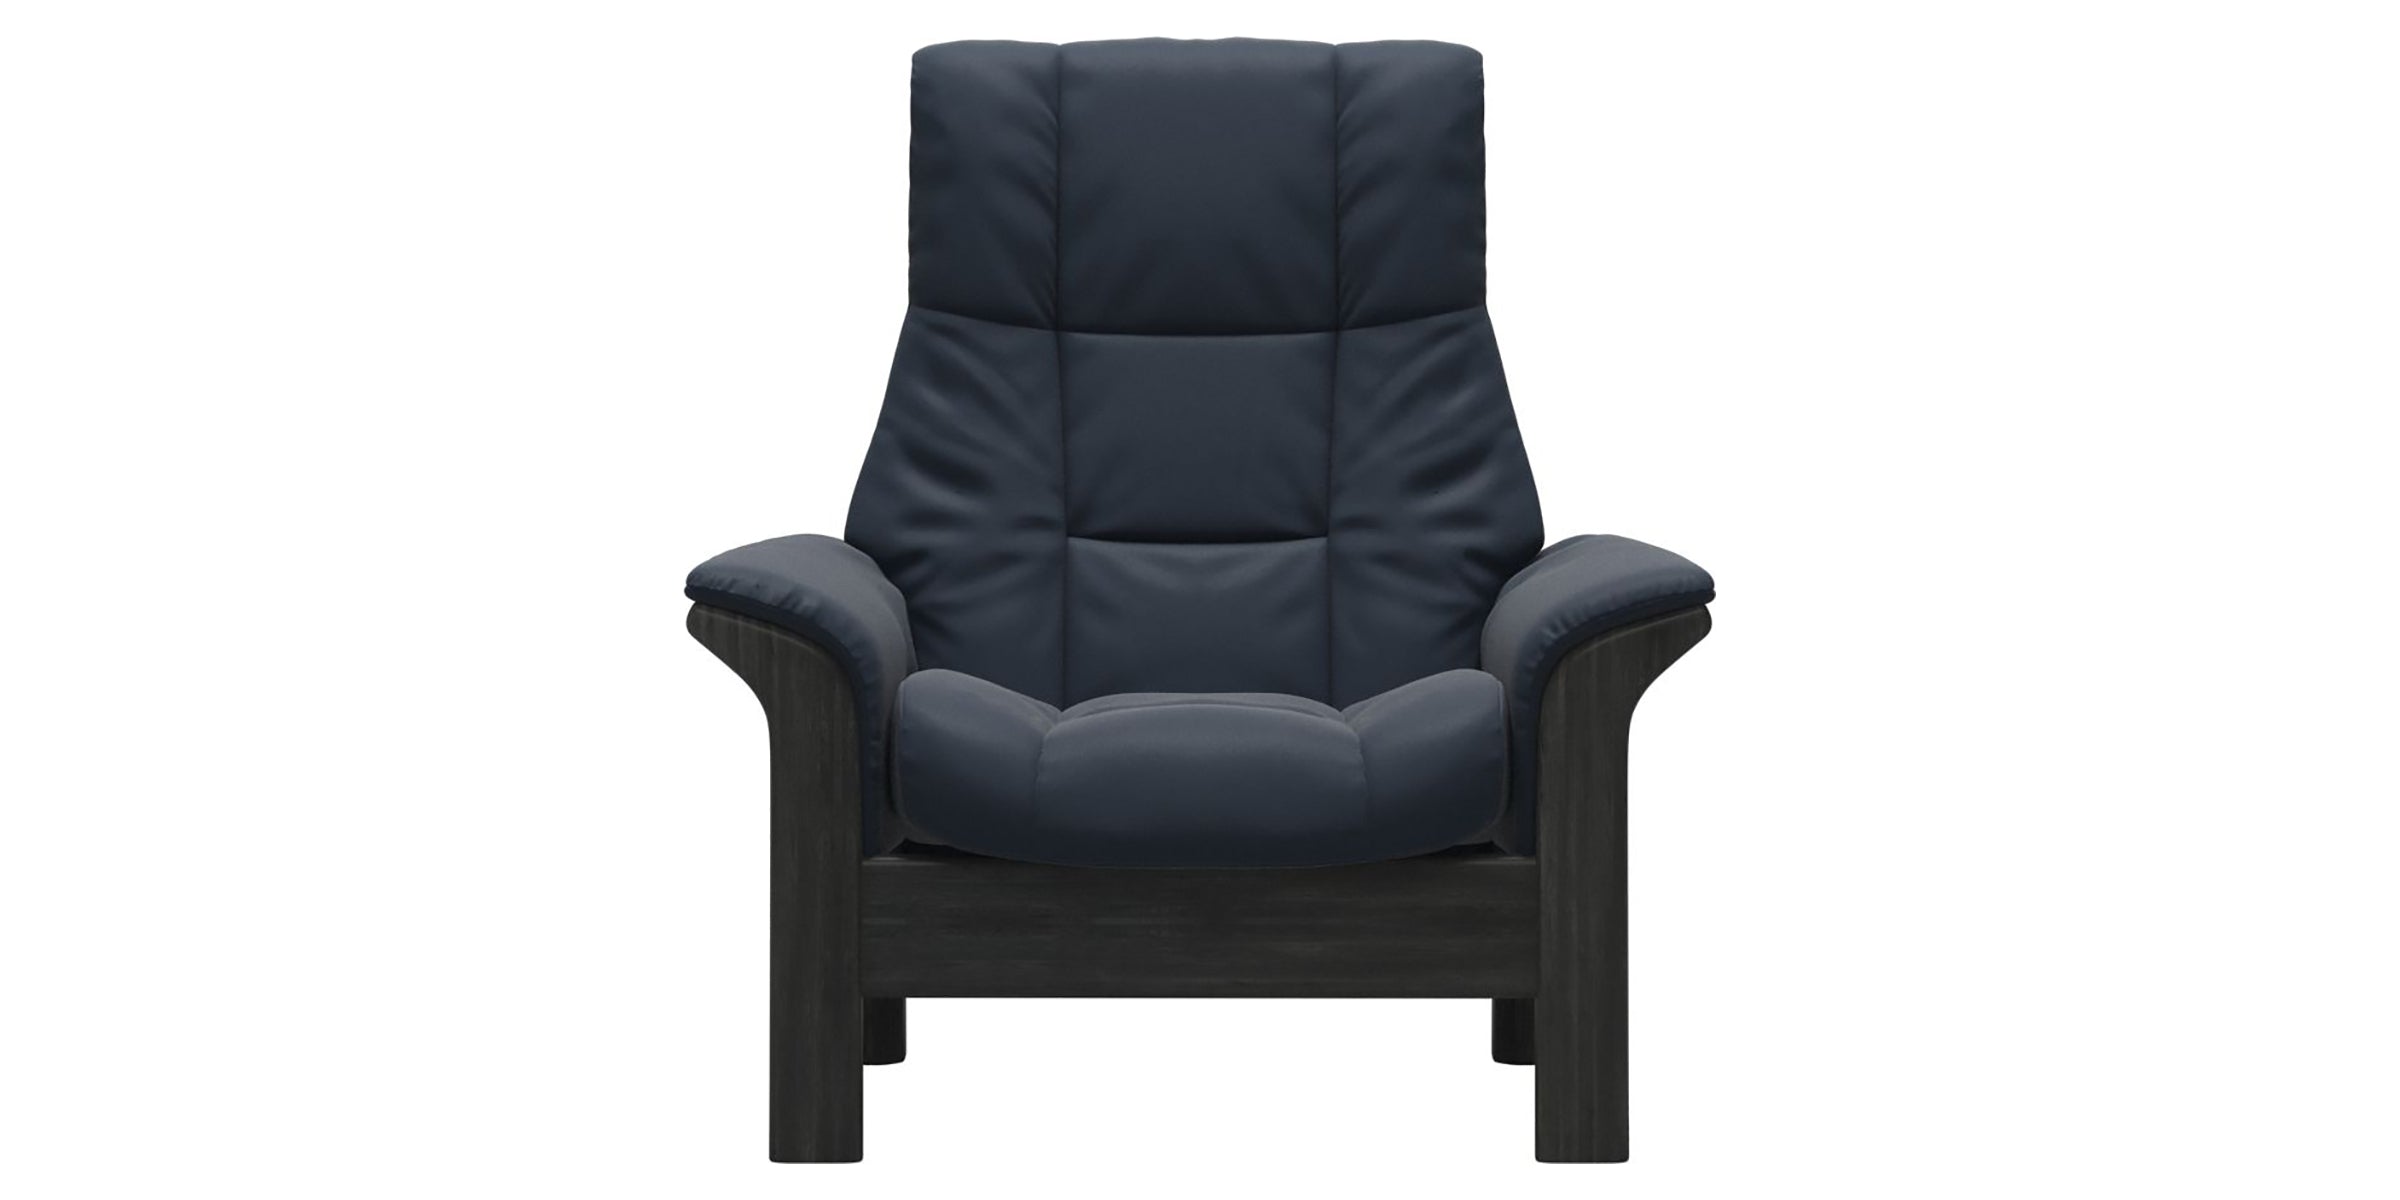 Paloma Leather Oxford Blue and Grey Base | Stressless Windsor High Back Chair | Valley Ridge Furniture